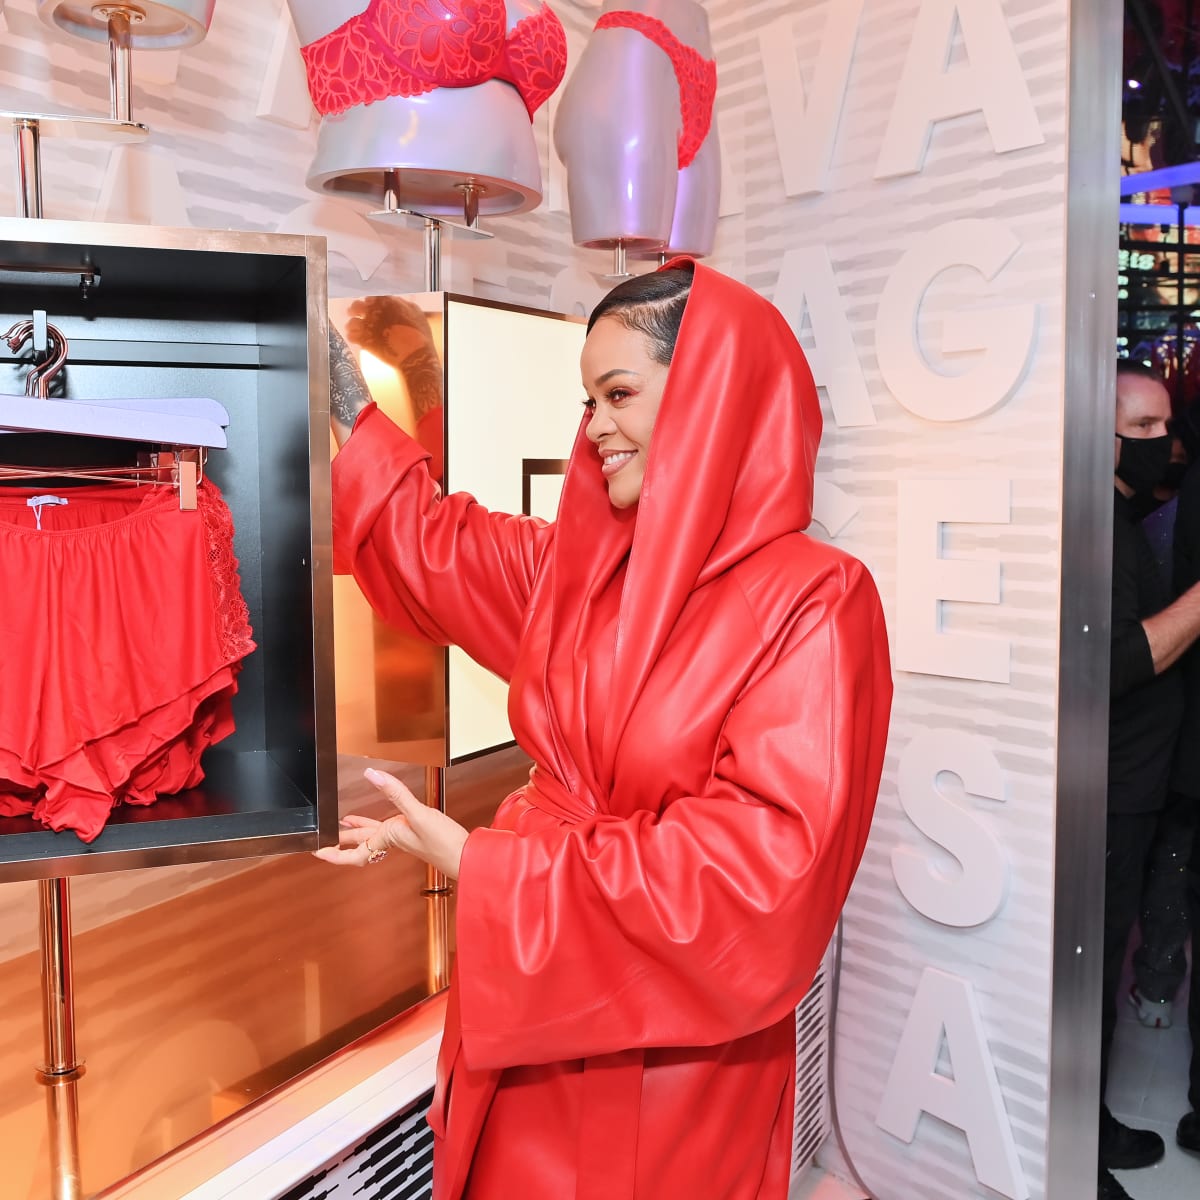 Rihanna's Savage X Fenty Brand Will Open First-Ever Physical Stores